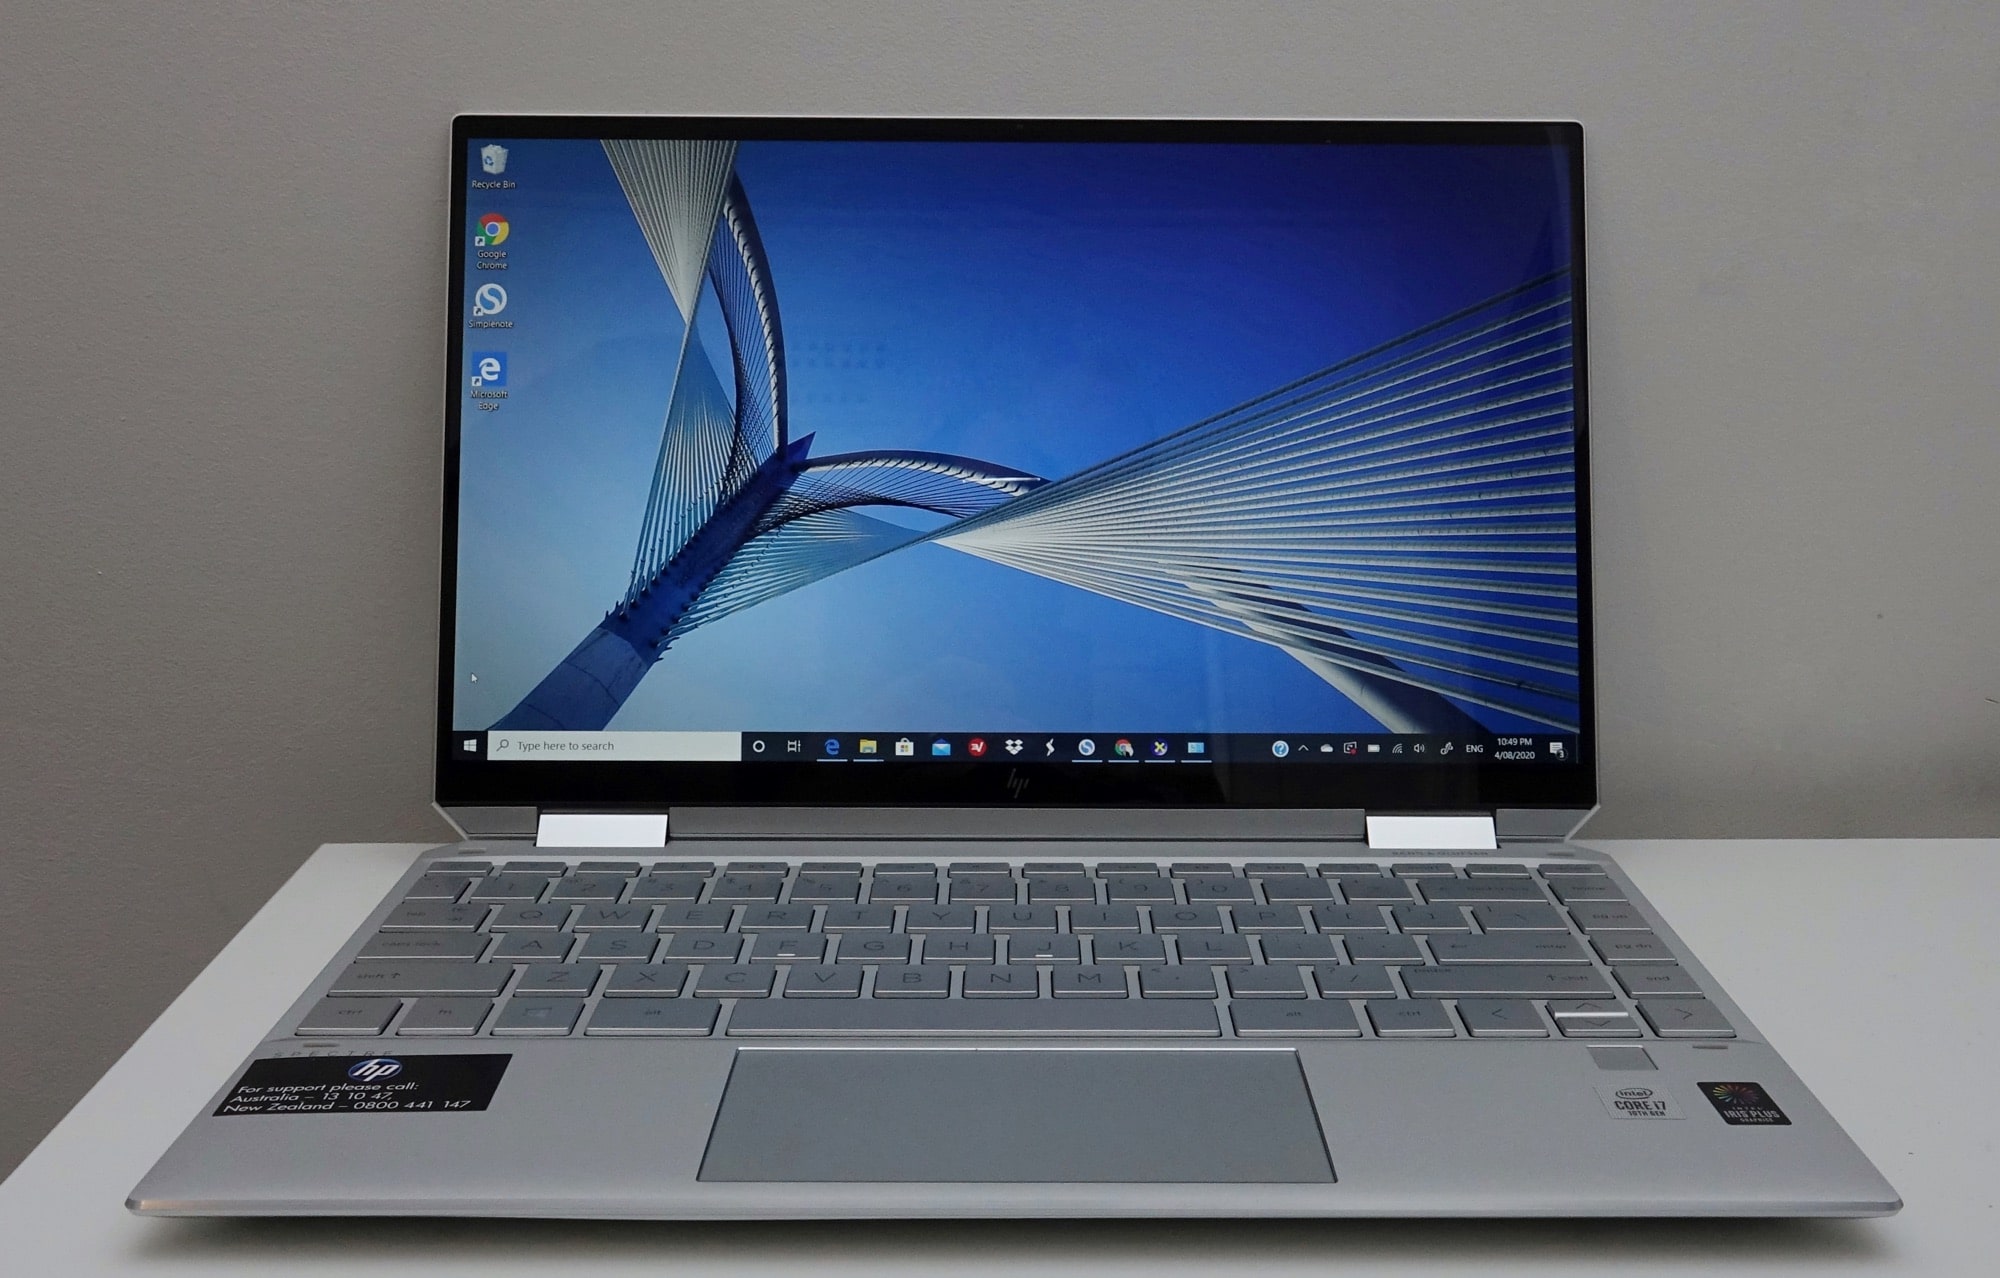 The HP Spectre X360 in 2020.